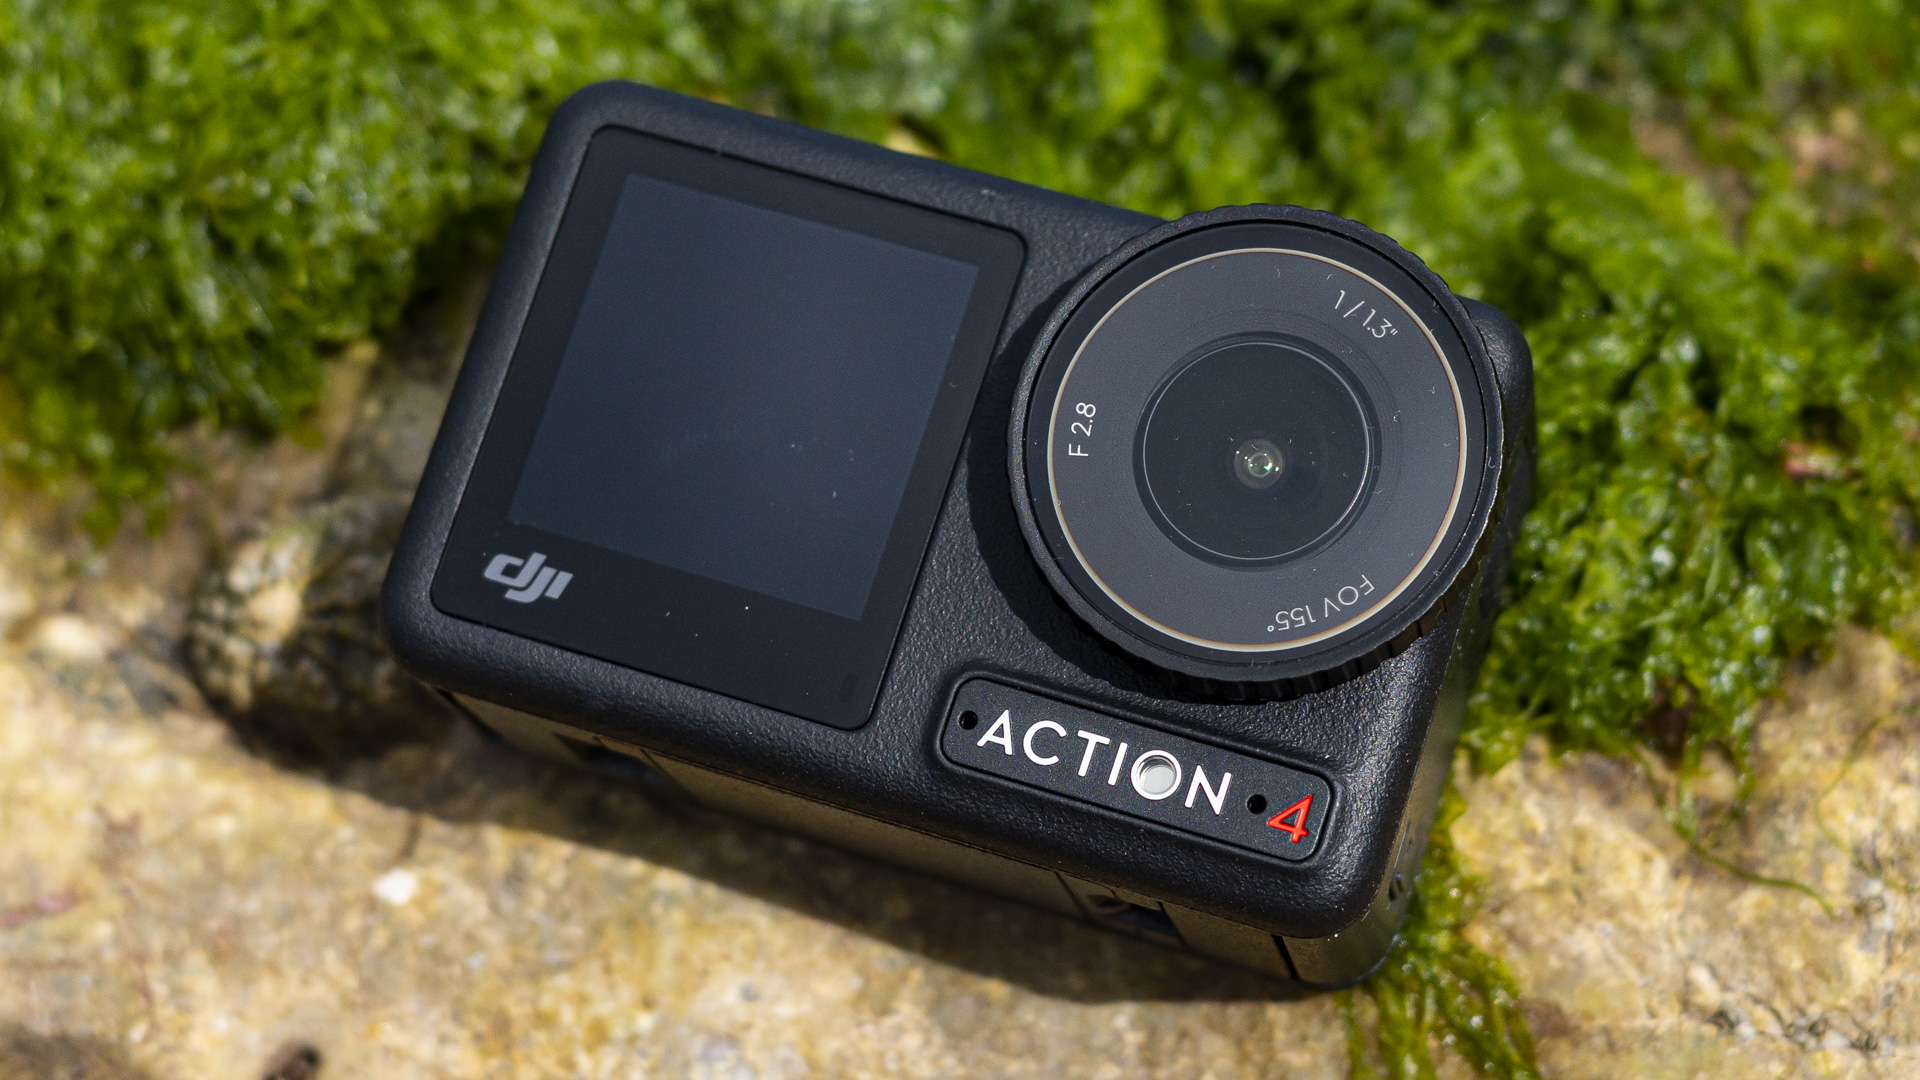 The DJI Osmo Action 4 has convinced me that action cams beat mirrorless for  vacations